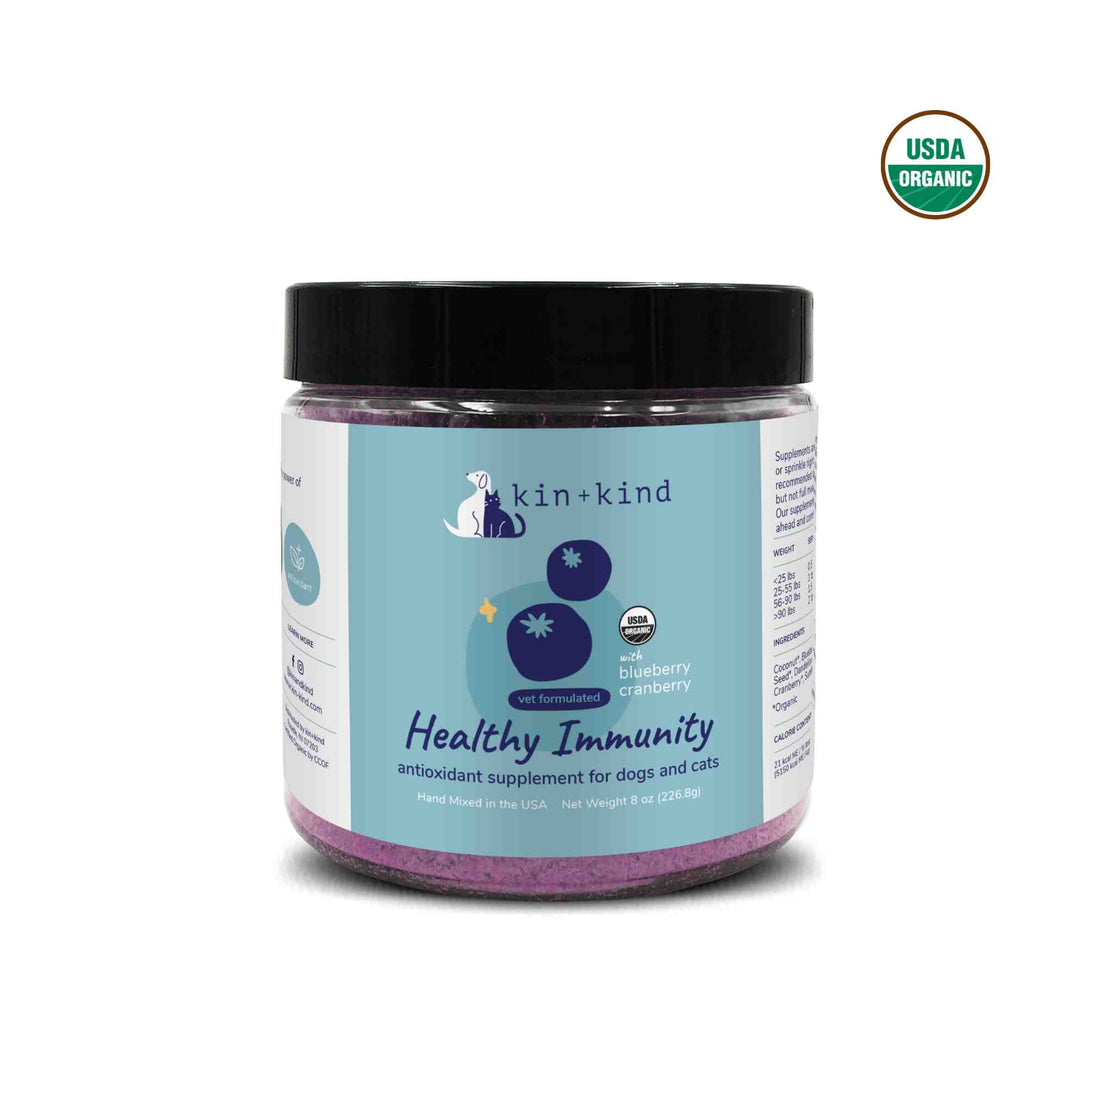 Healthy immunity antioixidant supplement for dogs and cats with blueberries and cranberries usda organic front of jar 